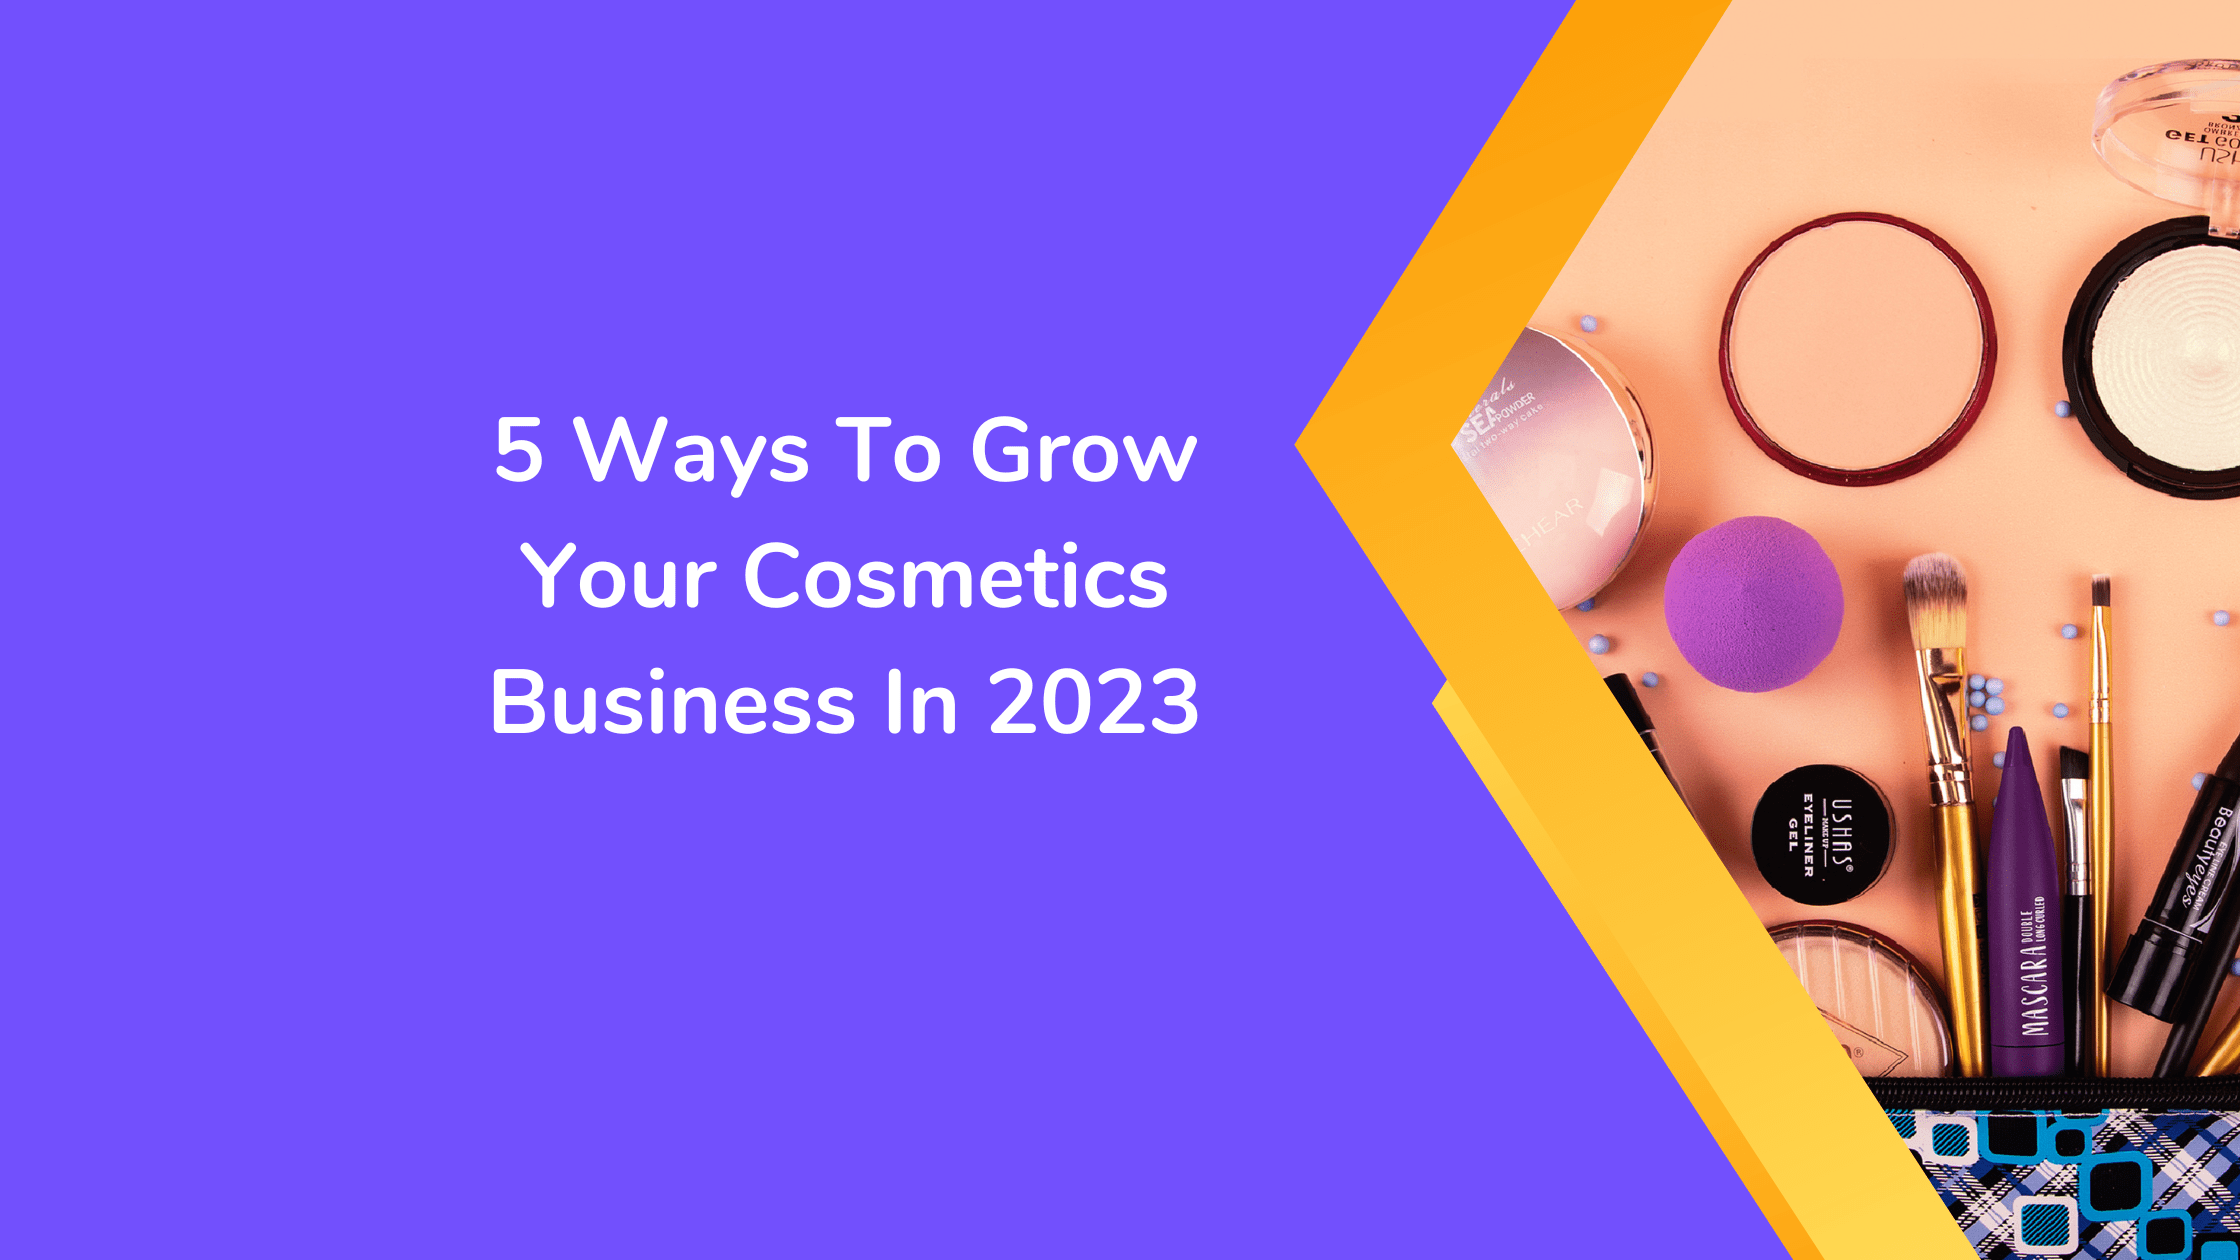 5 Ways To Grow Your Cosmetics Business In 2023